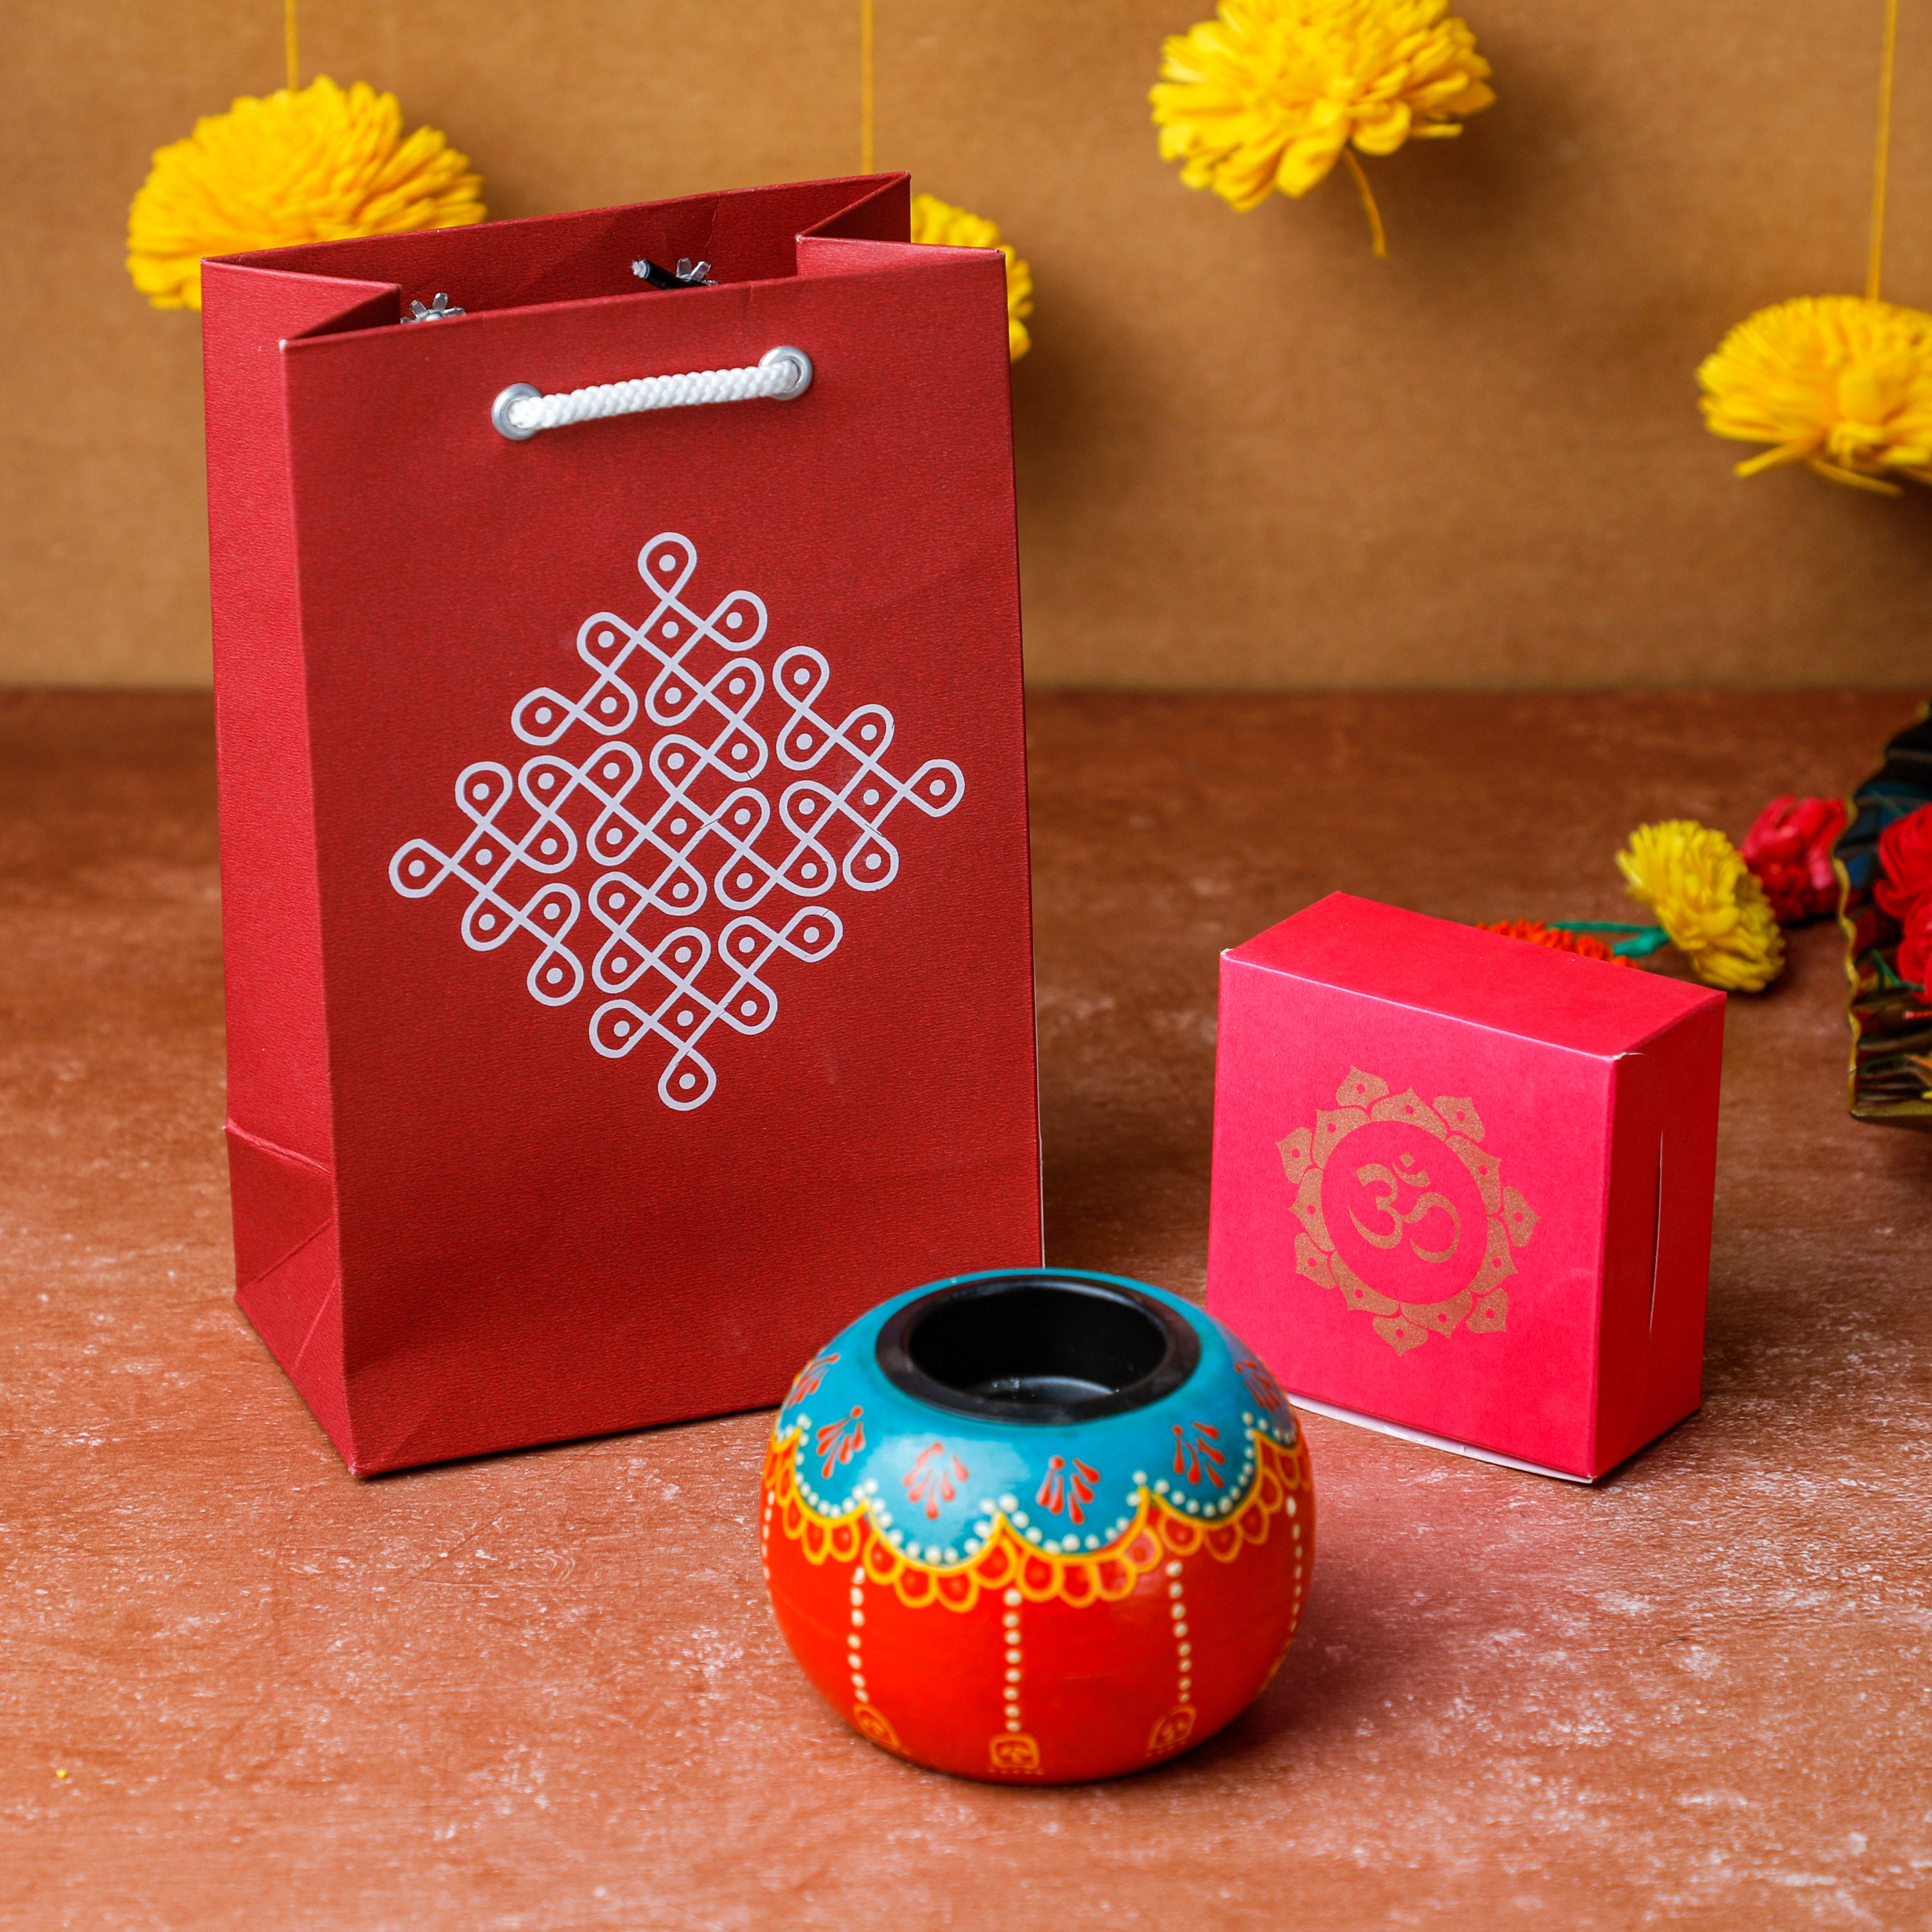 Top city hotels offer a sweet deal with their latest collection of Diwali  gift hampers